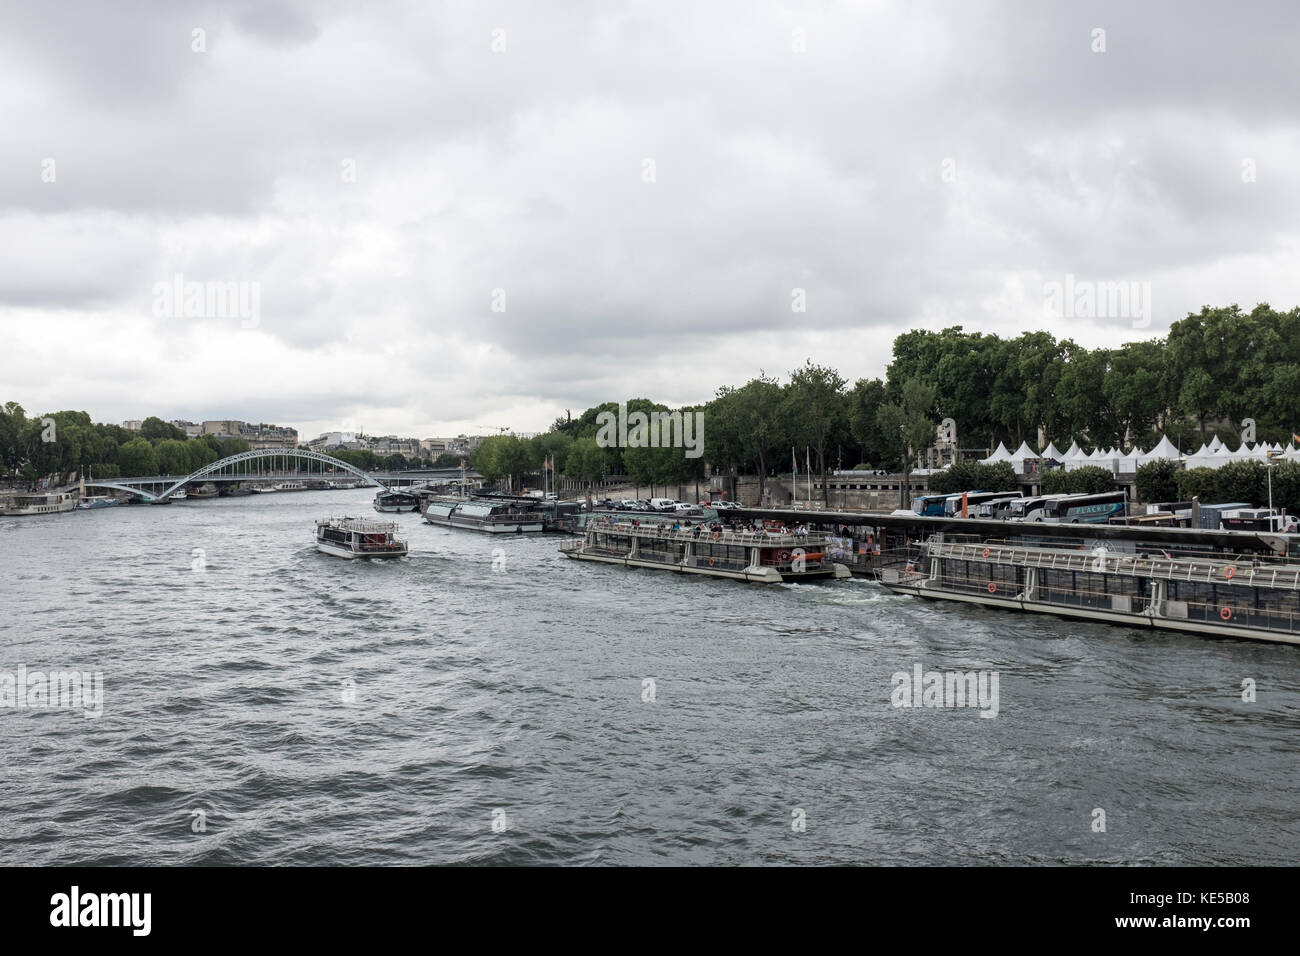 A view of the River Seine in Paris, France Stock Photo